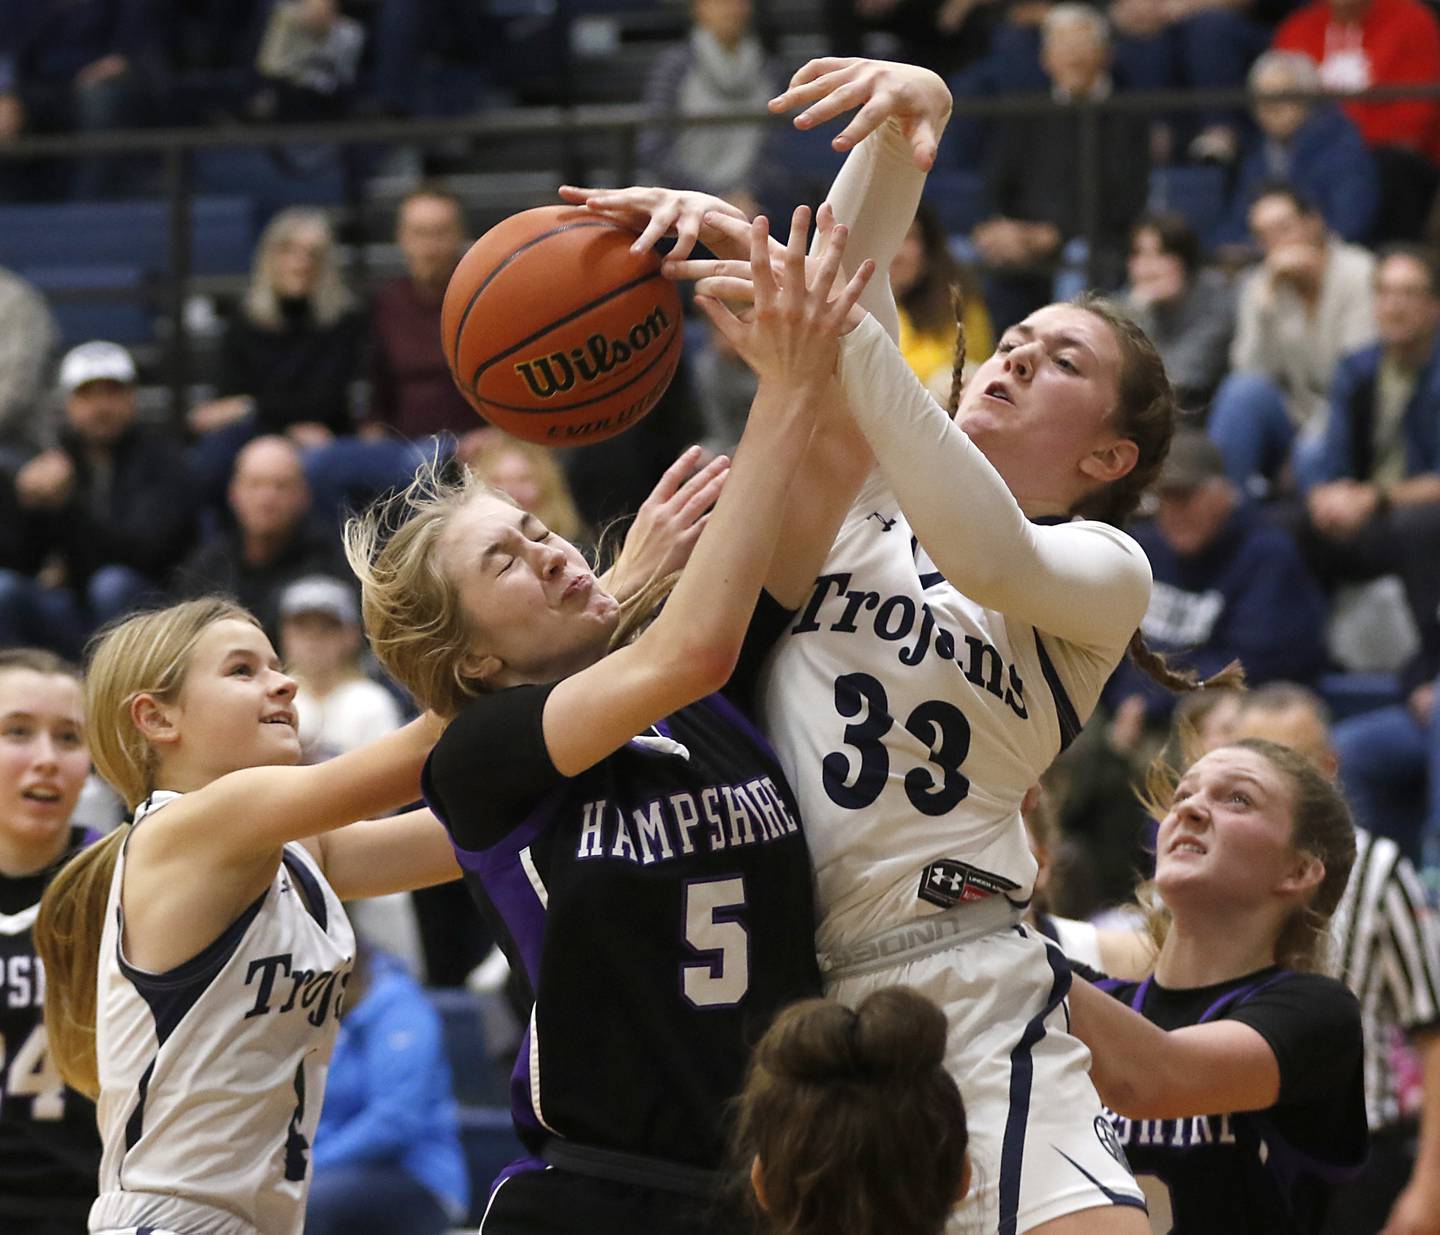 Hampshire's Avery Cartee, second from left, battles with Cary-Grove's Ellie Mjaanes second from right, for a rebound as their teammates, Cary-Grove's Aubrey Lonergan, left, and Hampshire's Kaitlyn Milison, right, tries to get to the ball during a Fox Valley Conference girls basketball game Friday, Dec.2, 2022, between Cary-Grove and Hampshire at Cary-Grove High School in Cary.